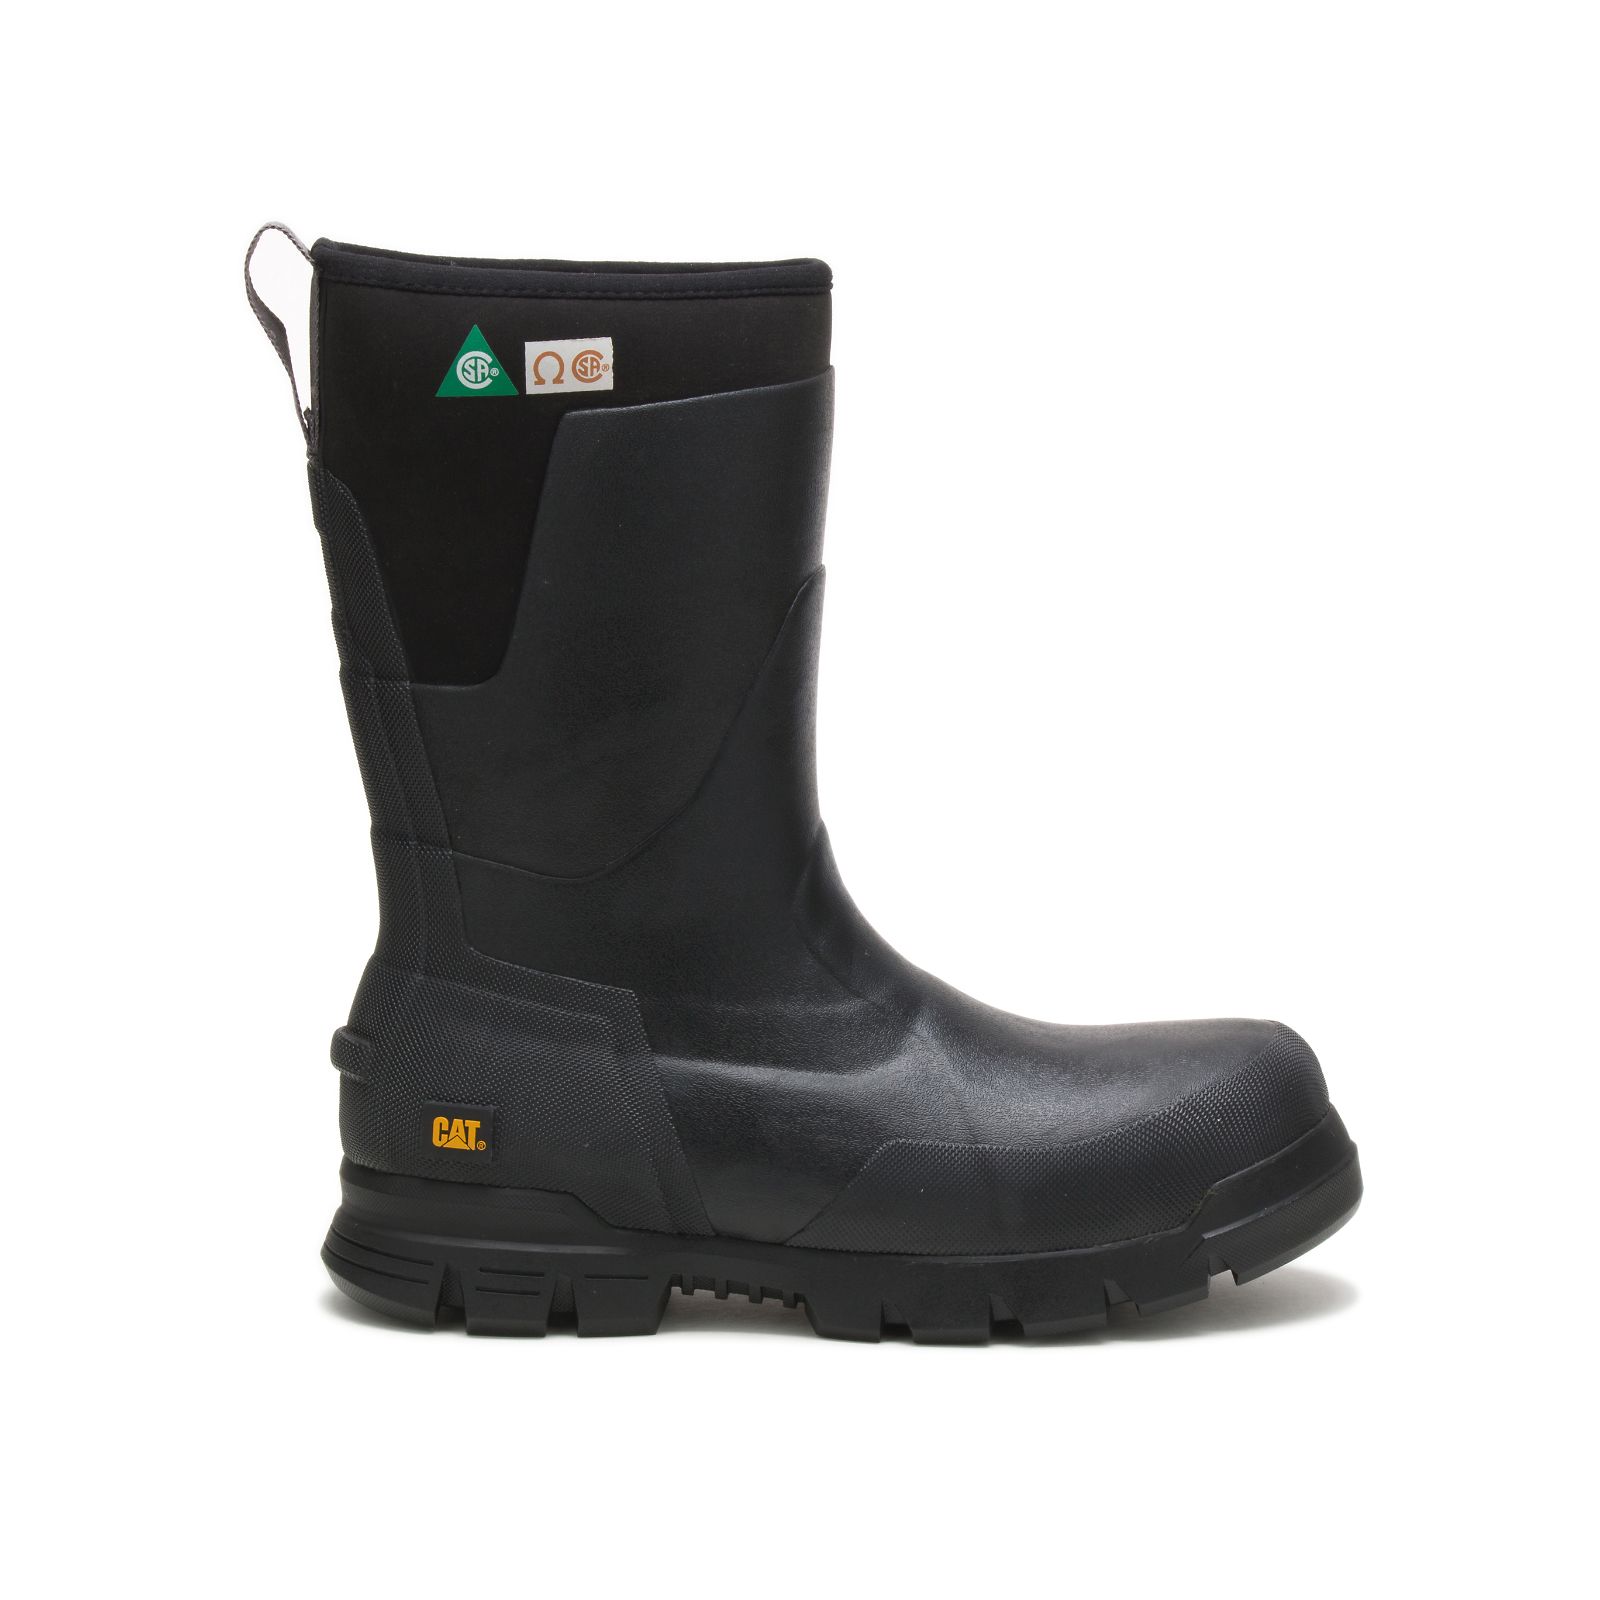 Caterpillar Stormers 11" Steel Toe Csa Philippines - Womens Rubber Boots - Black 69157JALM